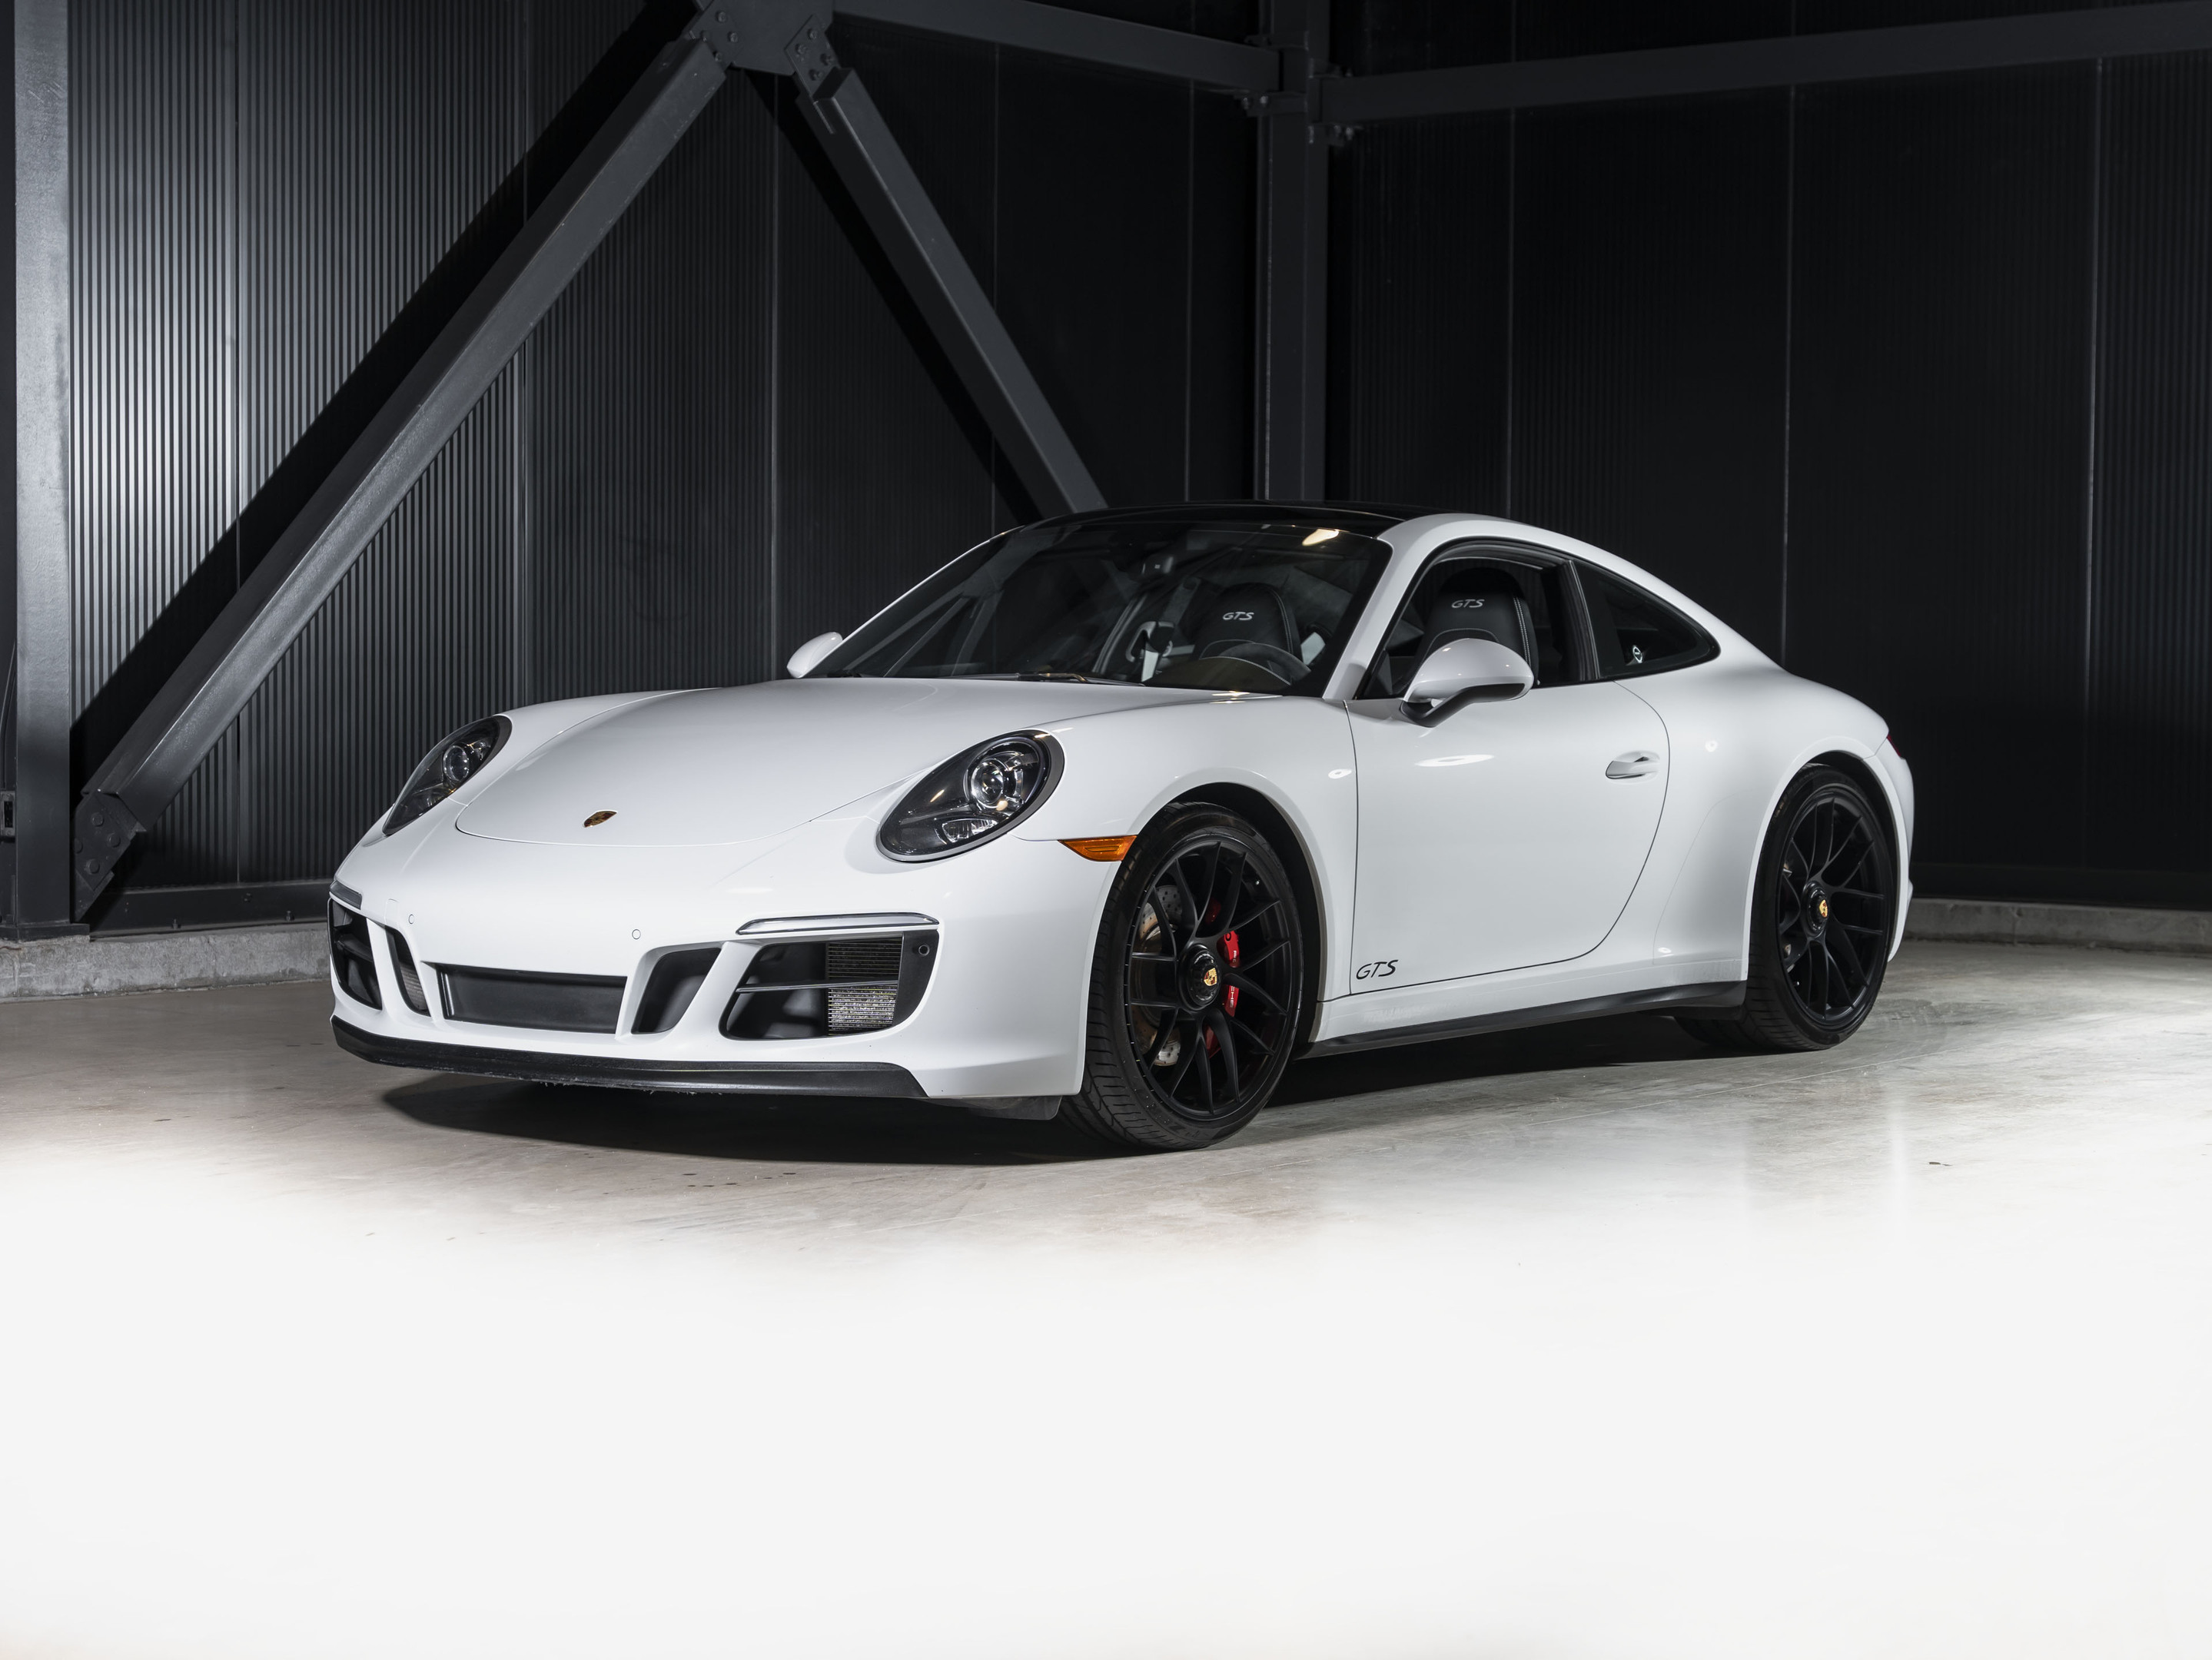 2019 Porsche 911 Certified Pre-Owned - Bose 